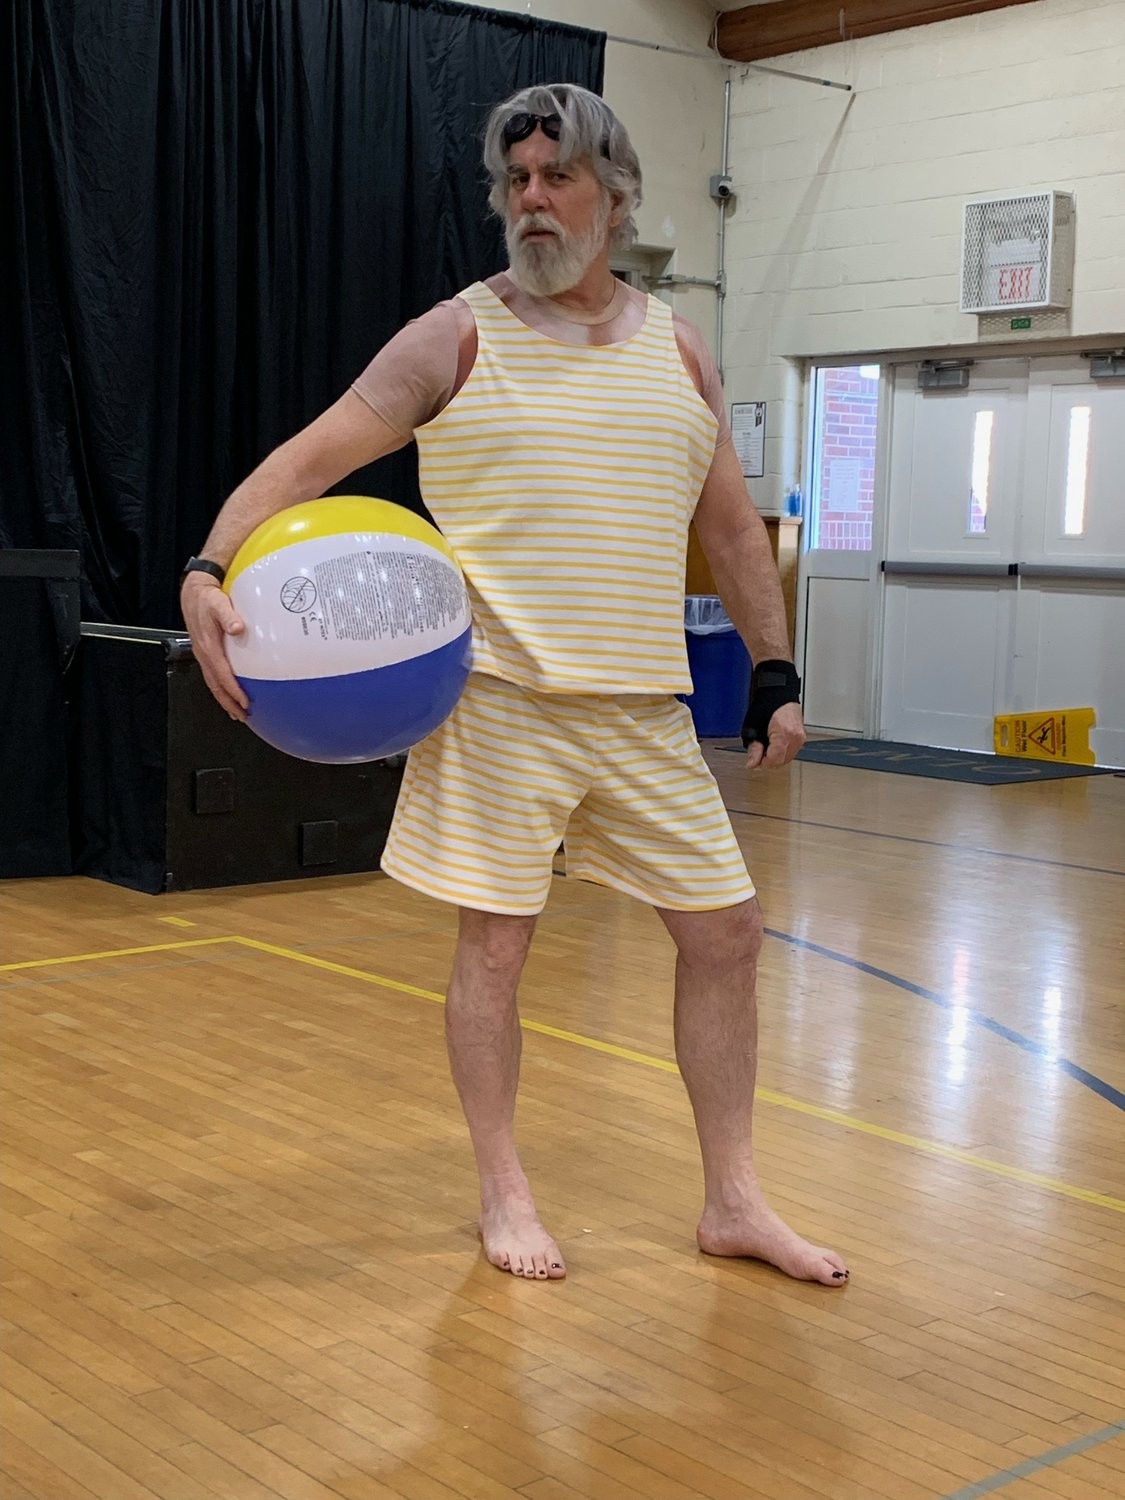 Jamie Wilson of Chalfont models his old-time bathing suit for the Beach Ball Ballet skit, as part of the State Street Players.